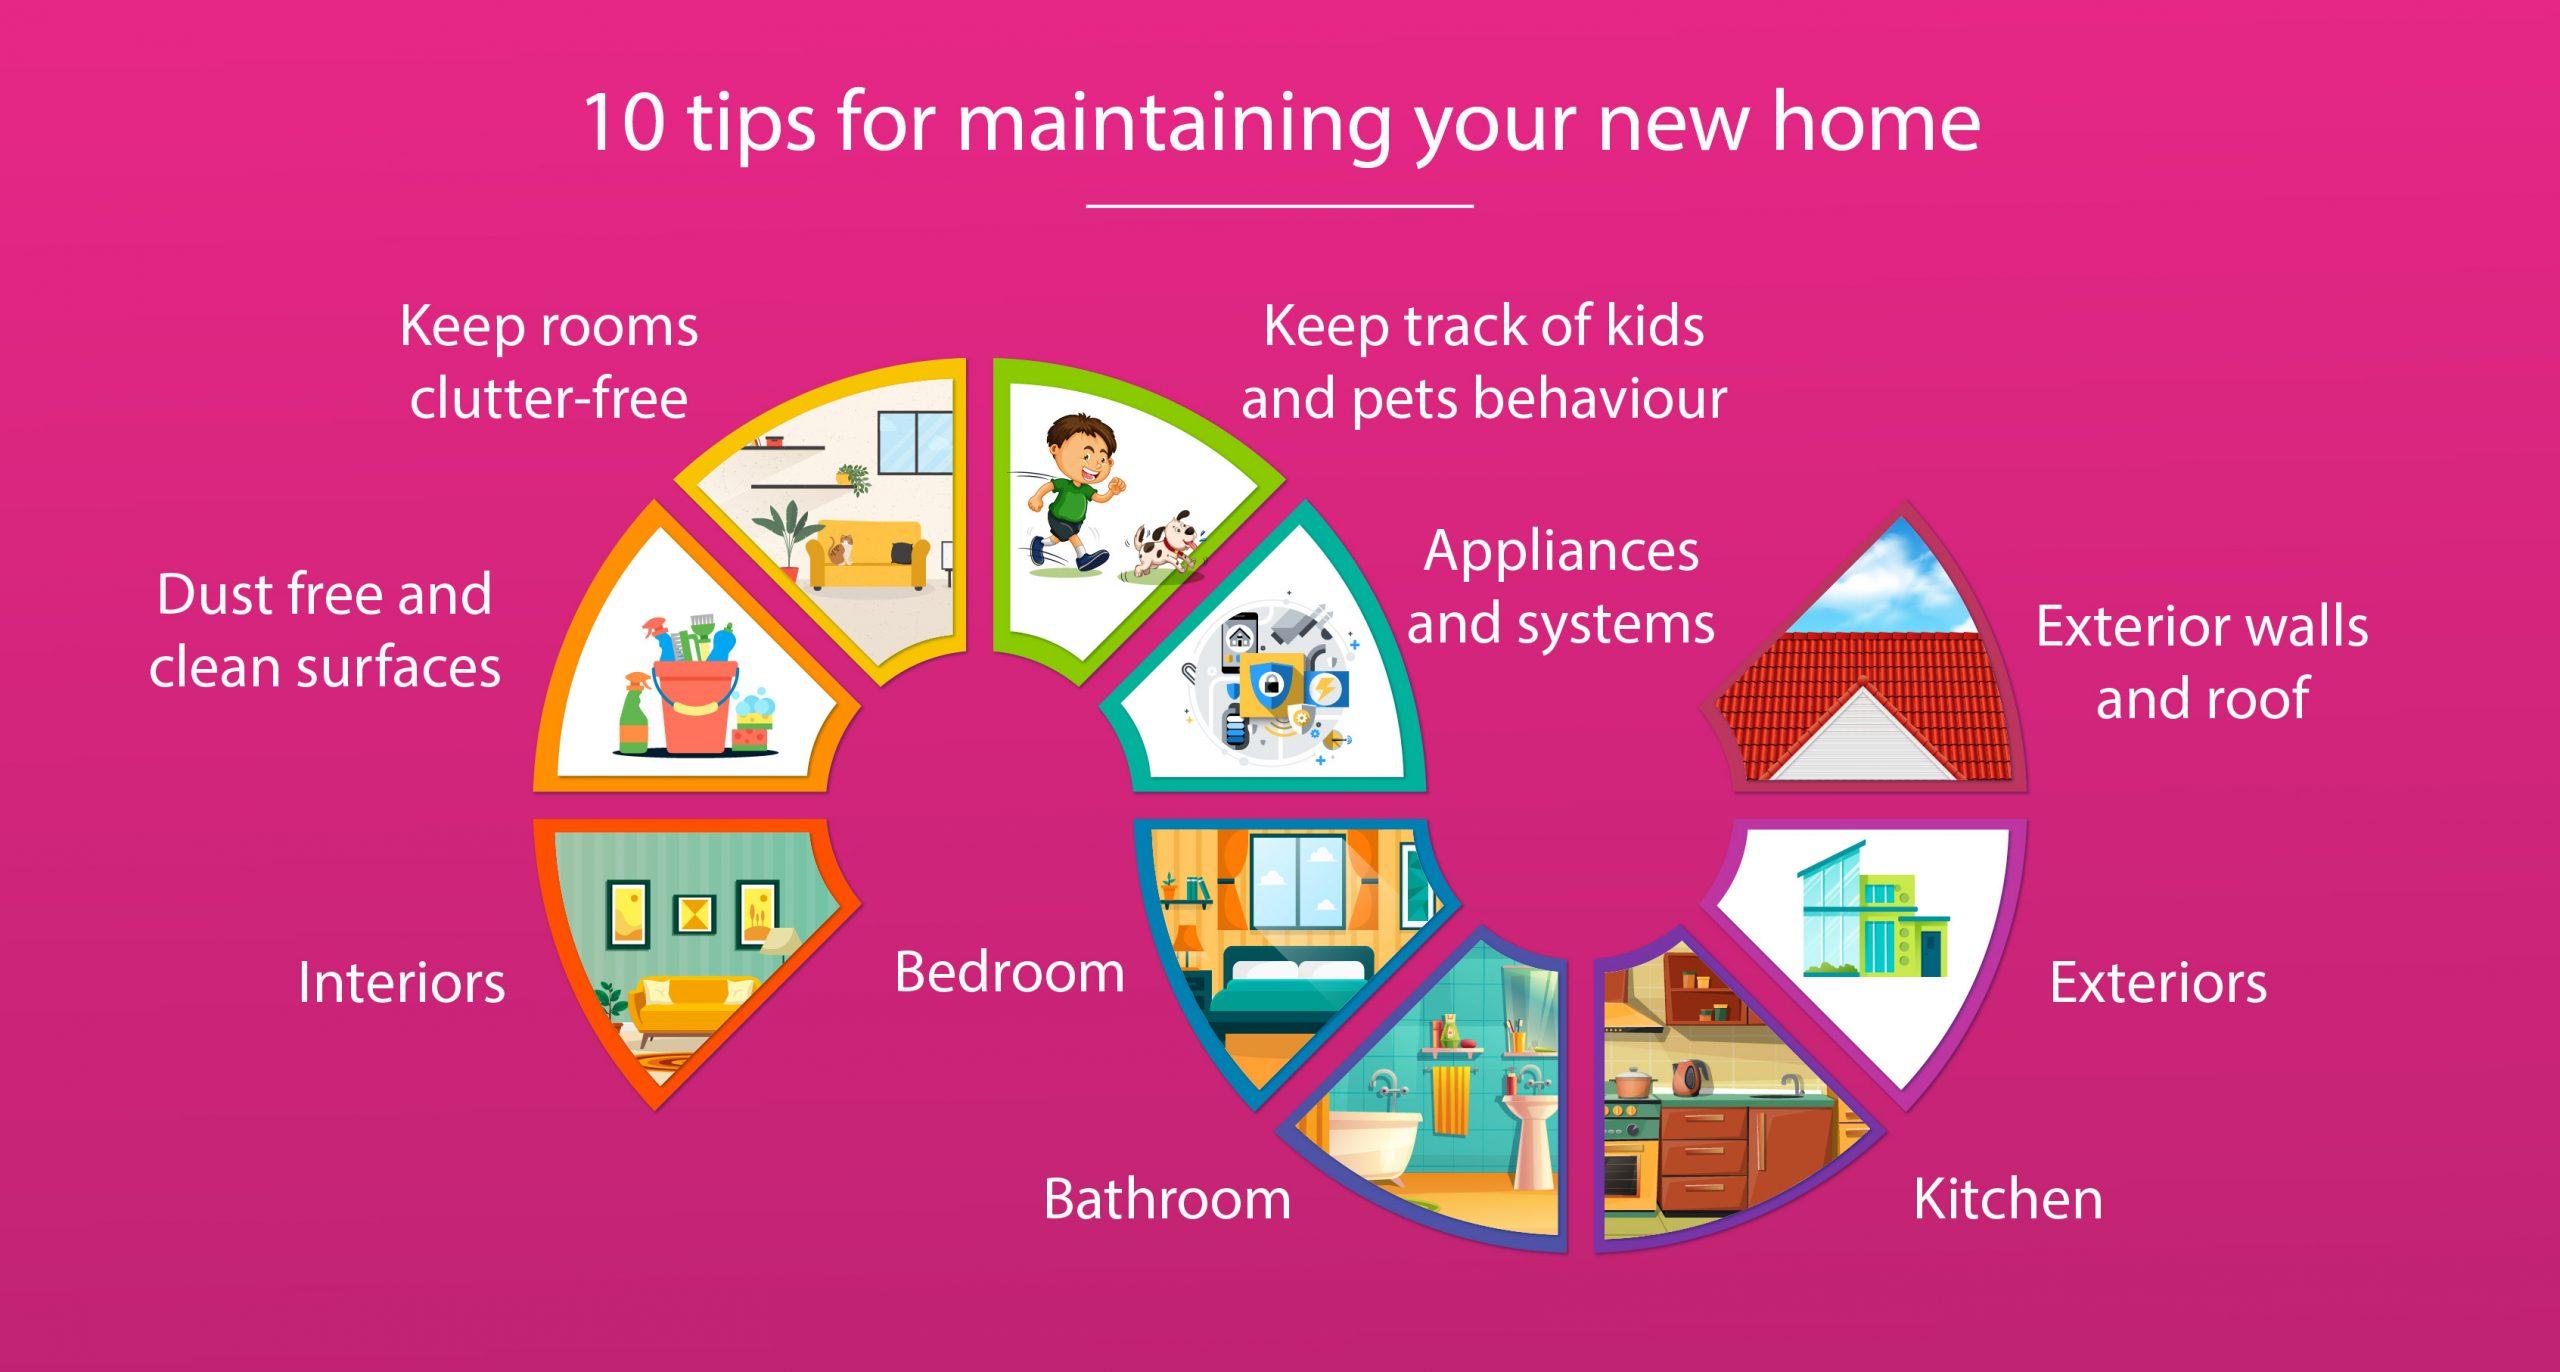 10 tips for maintaining your new home